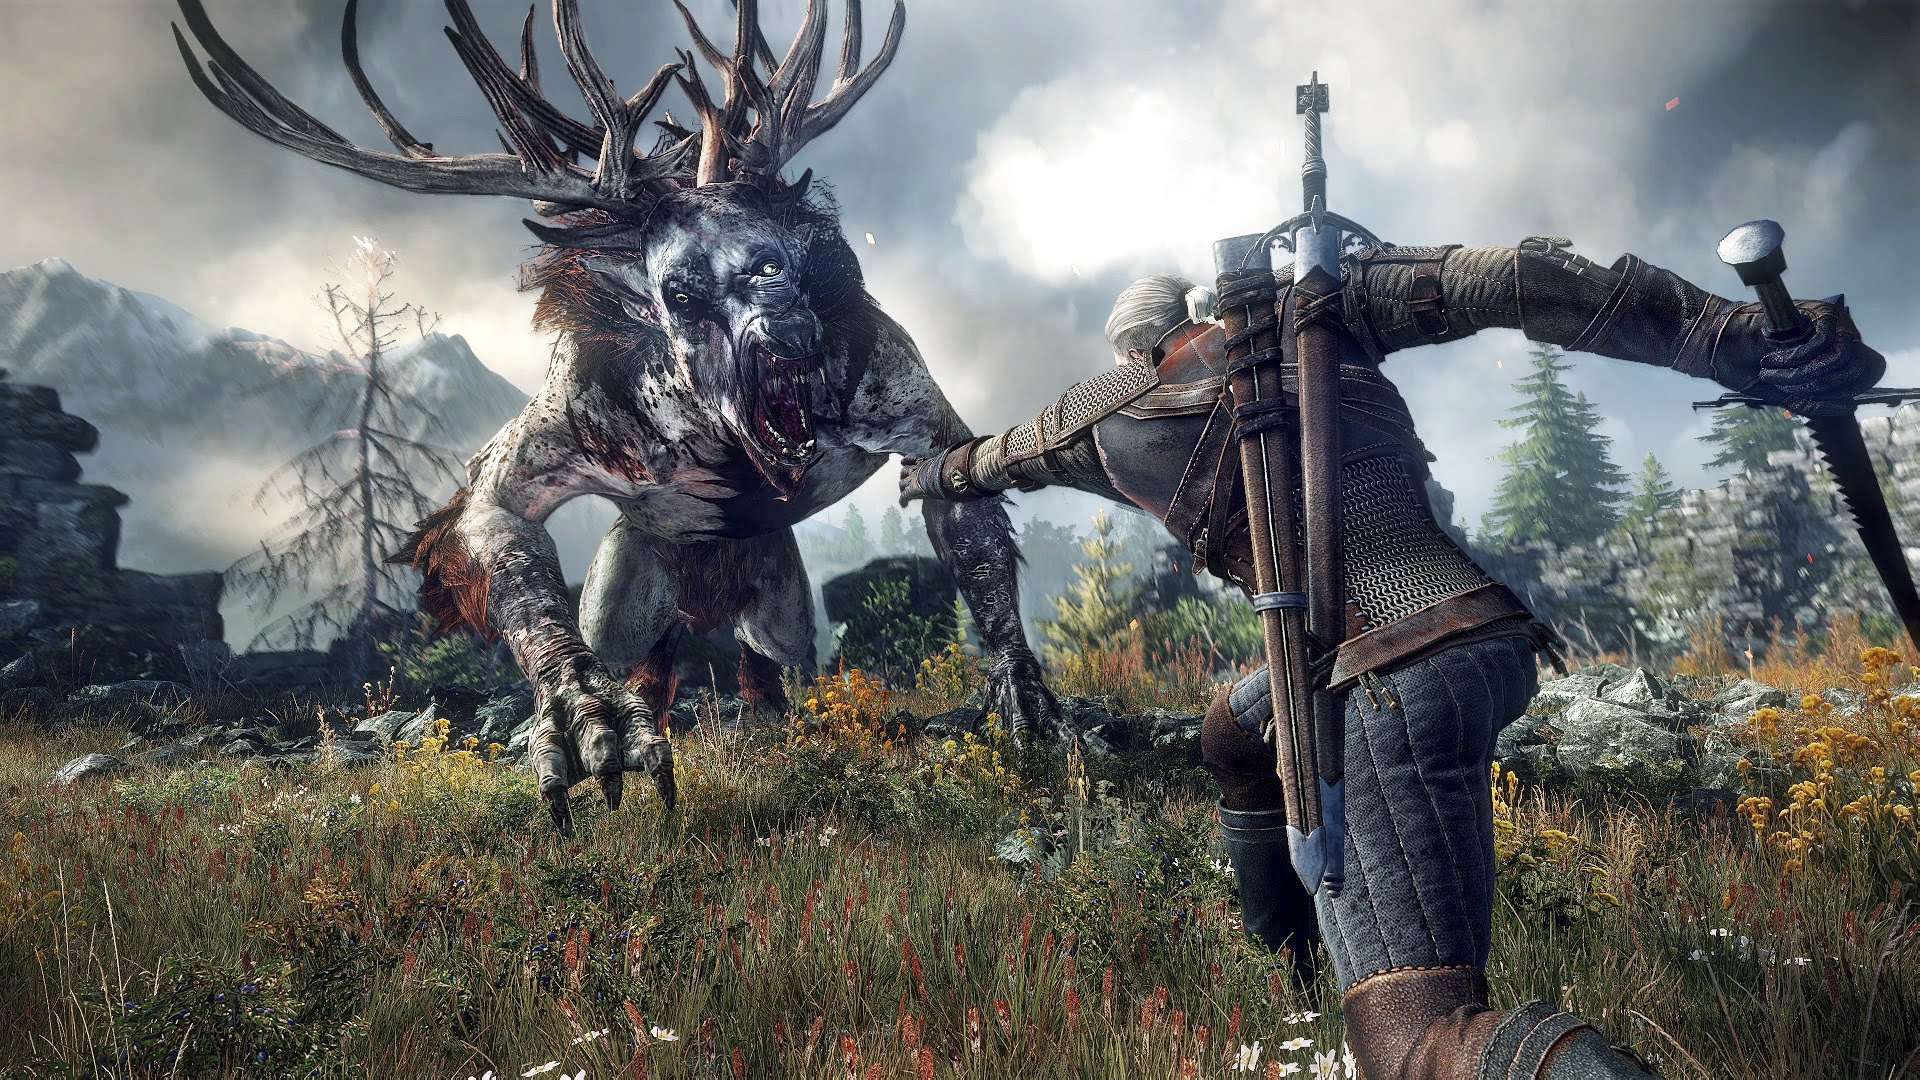 A screen grab from The Witcher 3: Wild Hunt.